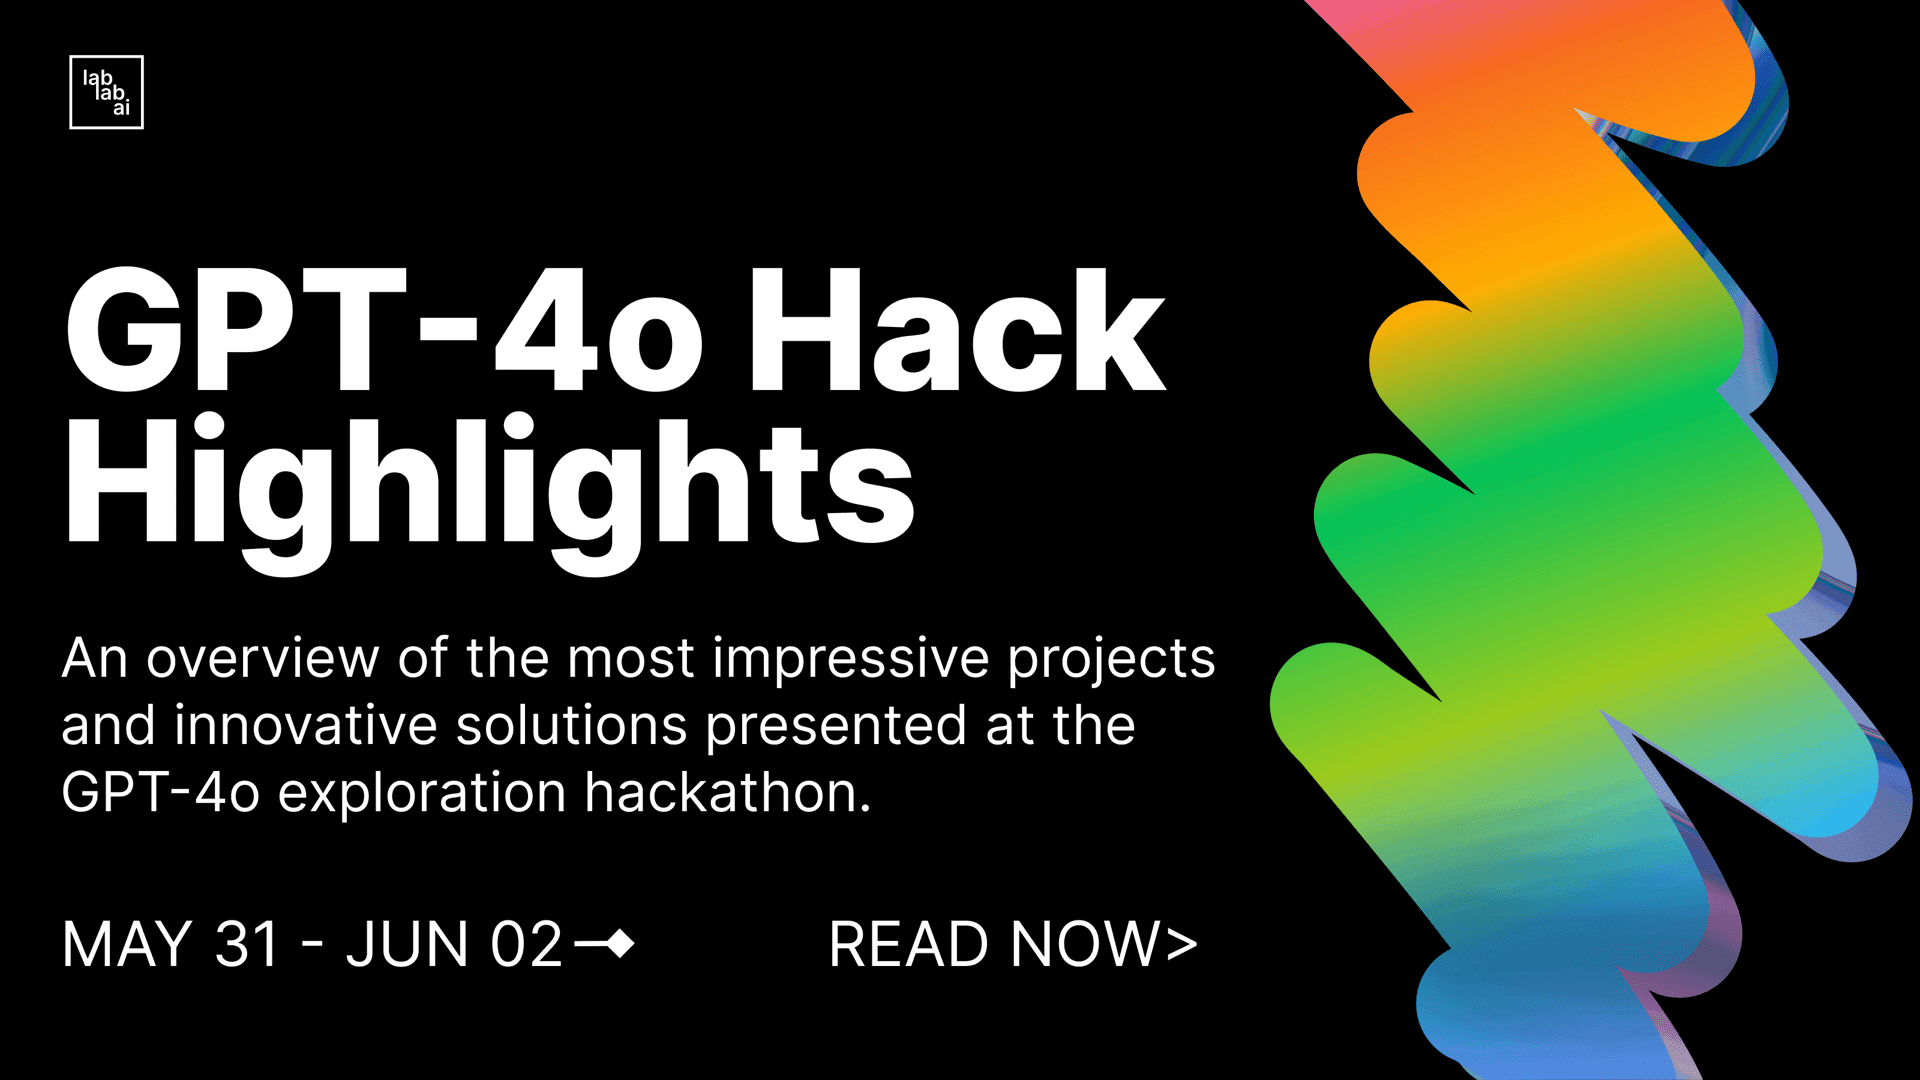 GPT-4o Hack Highlights: A Look Back at Innovation and Collaboration